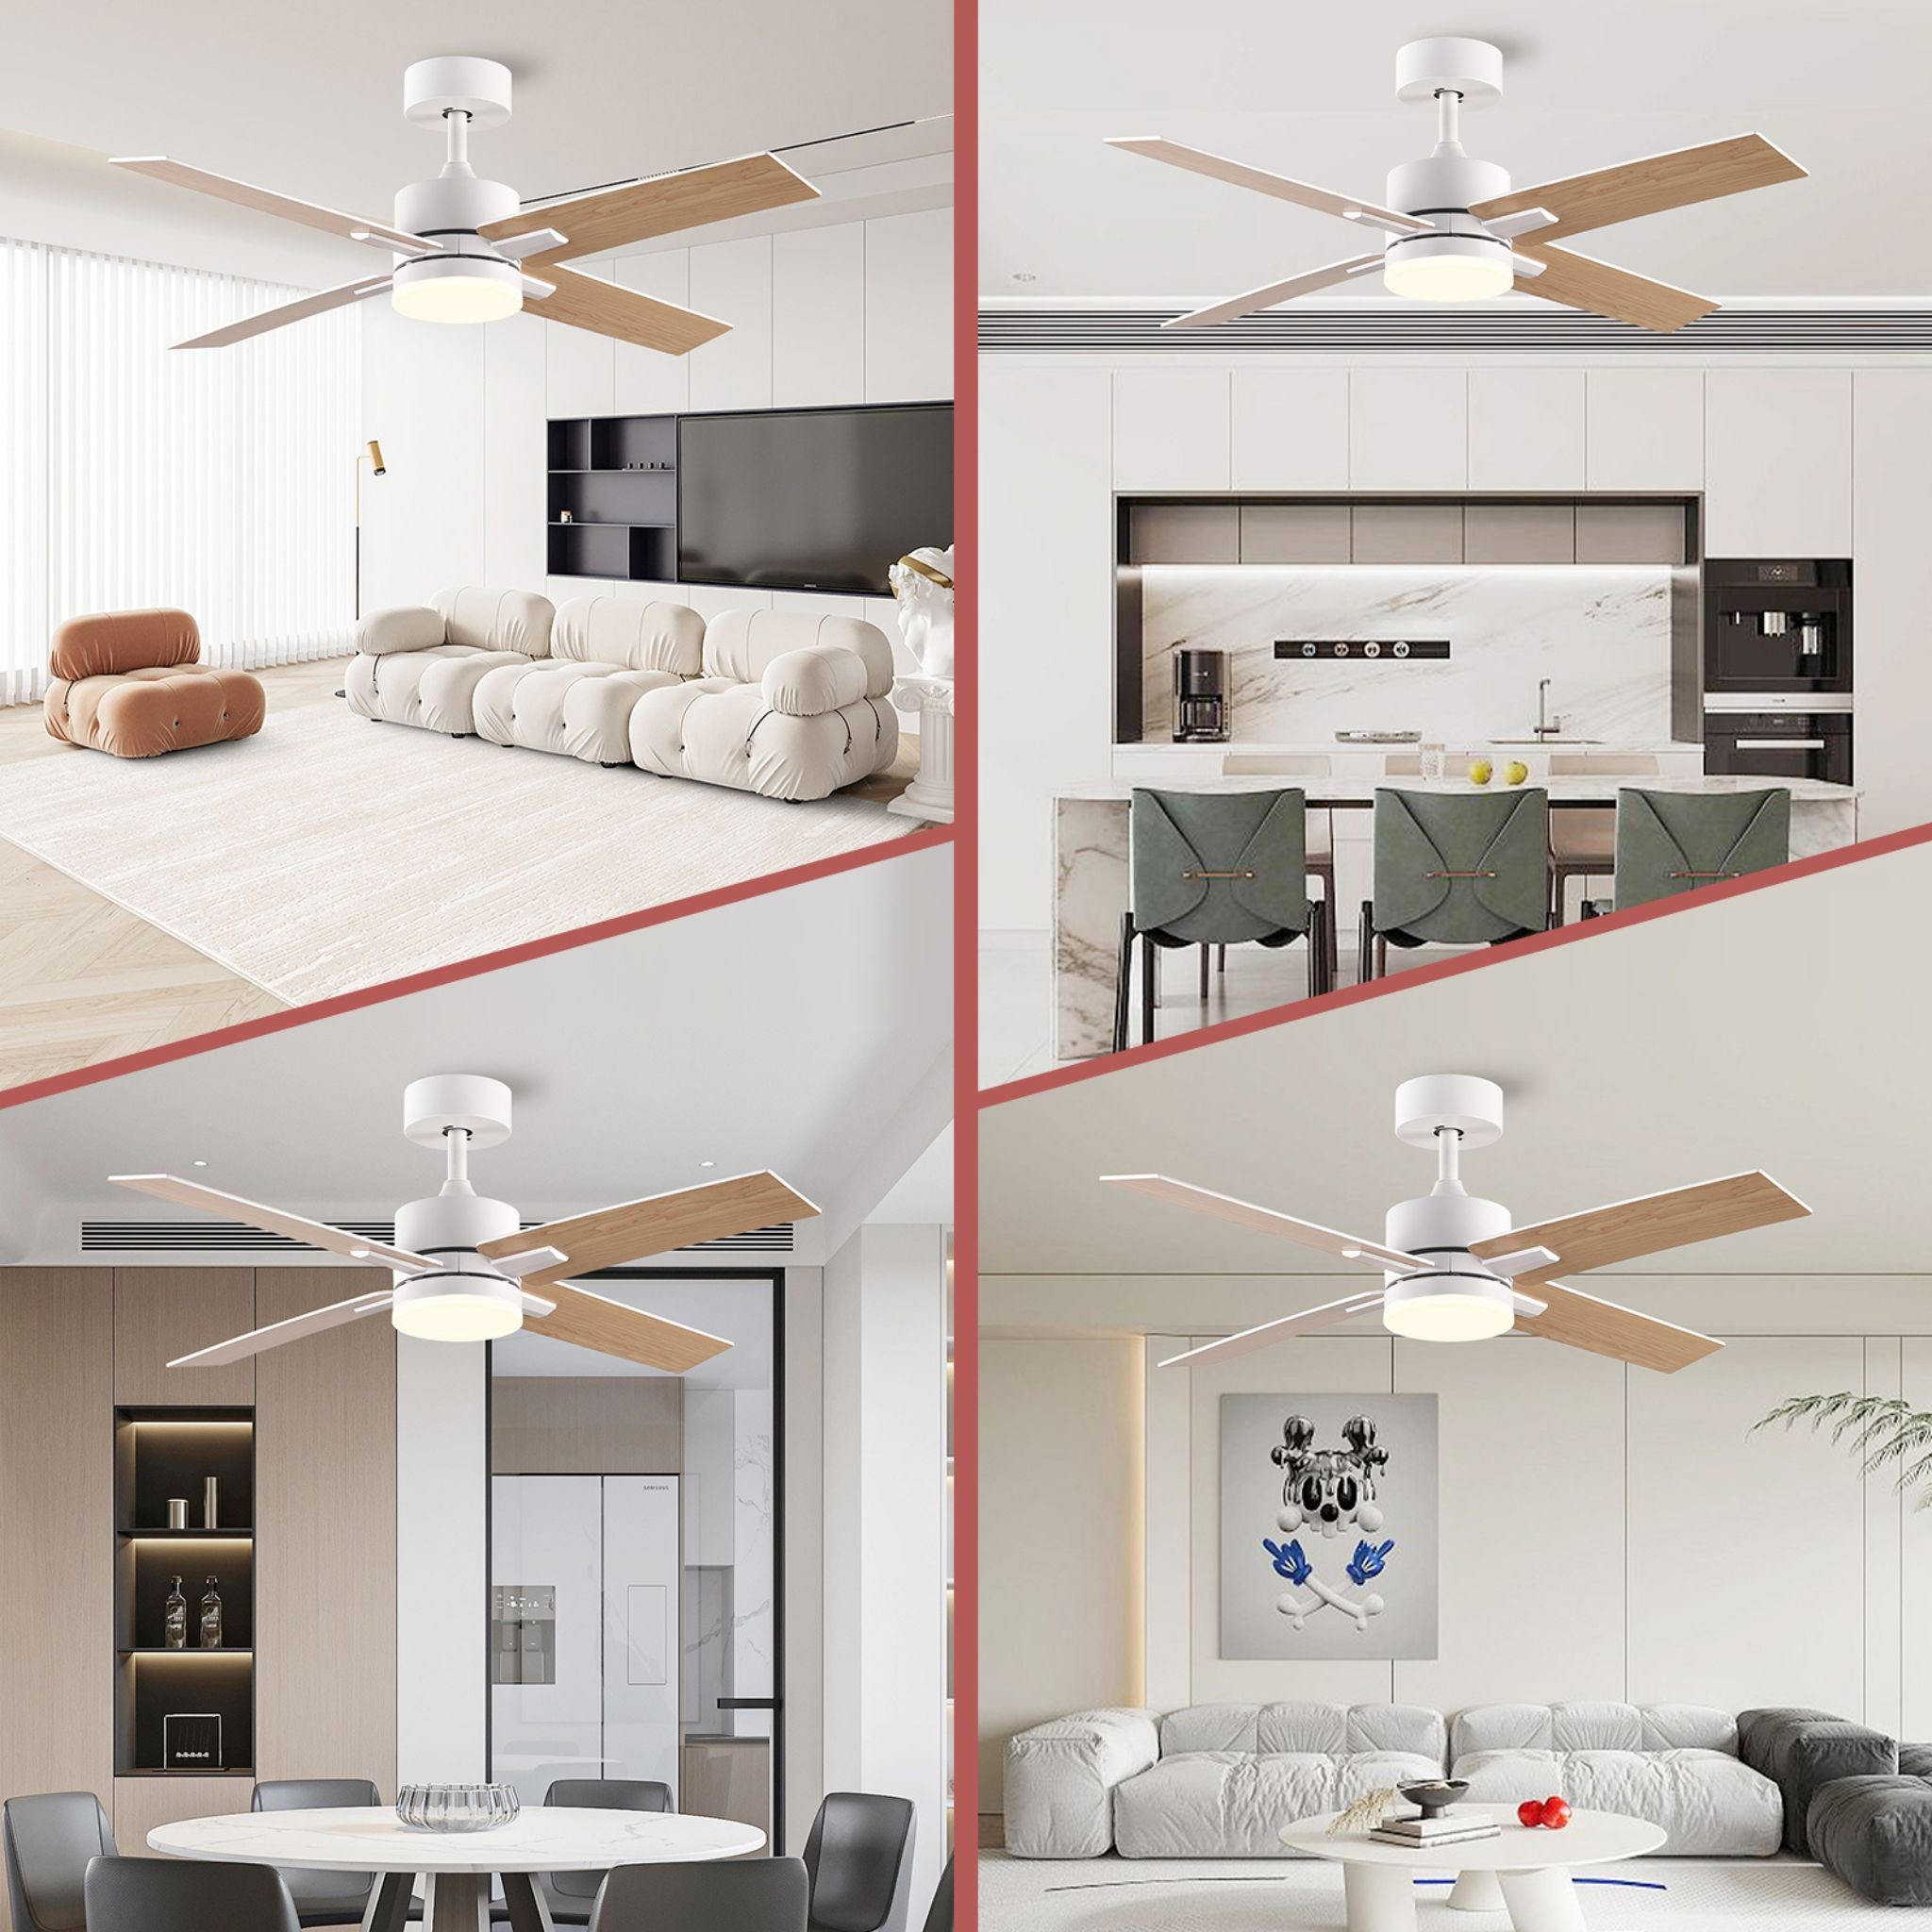 44" White And Brown and White Propeller Four Blade Dimmable Remote Control Integrated Light Ceiling Fan